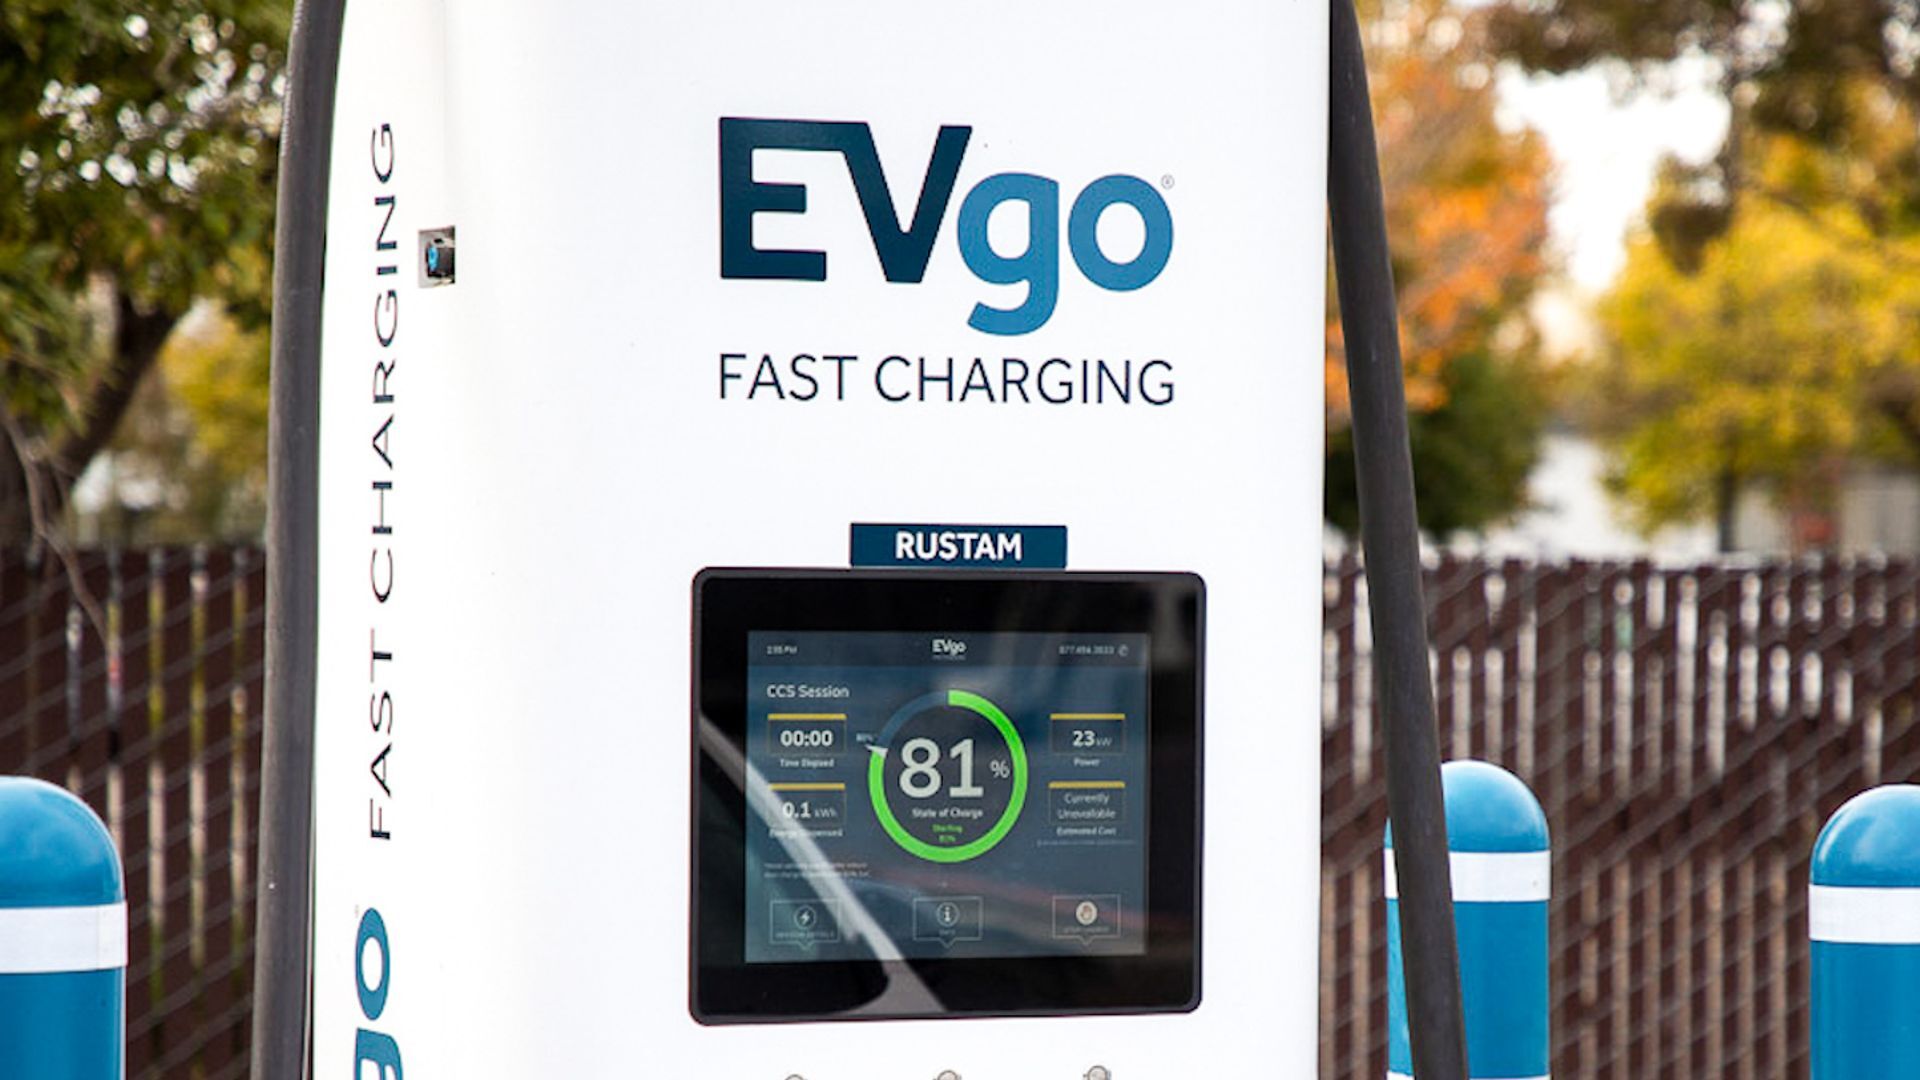 Congress allocated .5 billion to create EV charging stations across the United States. That first and only station is now running in Ohio.